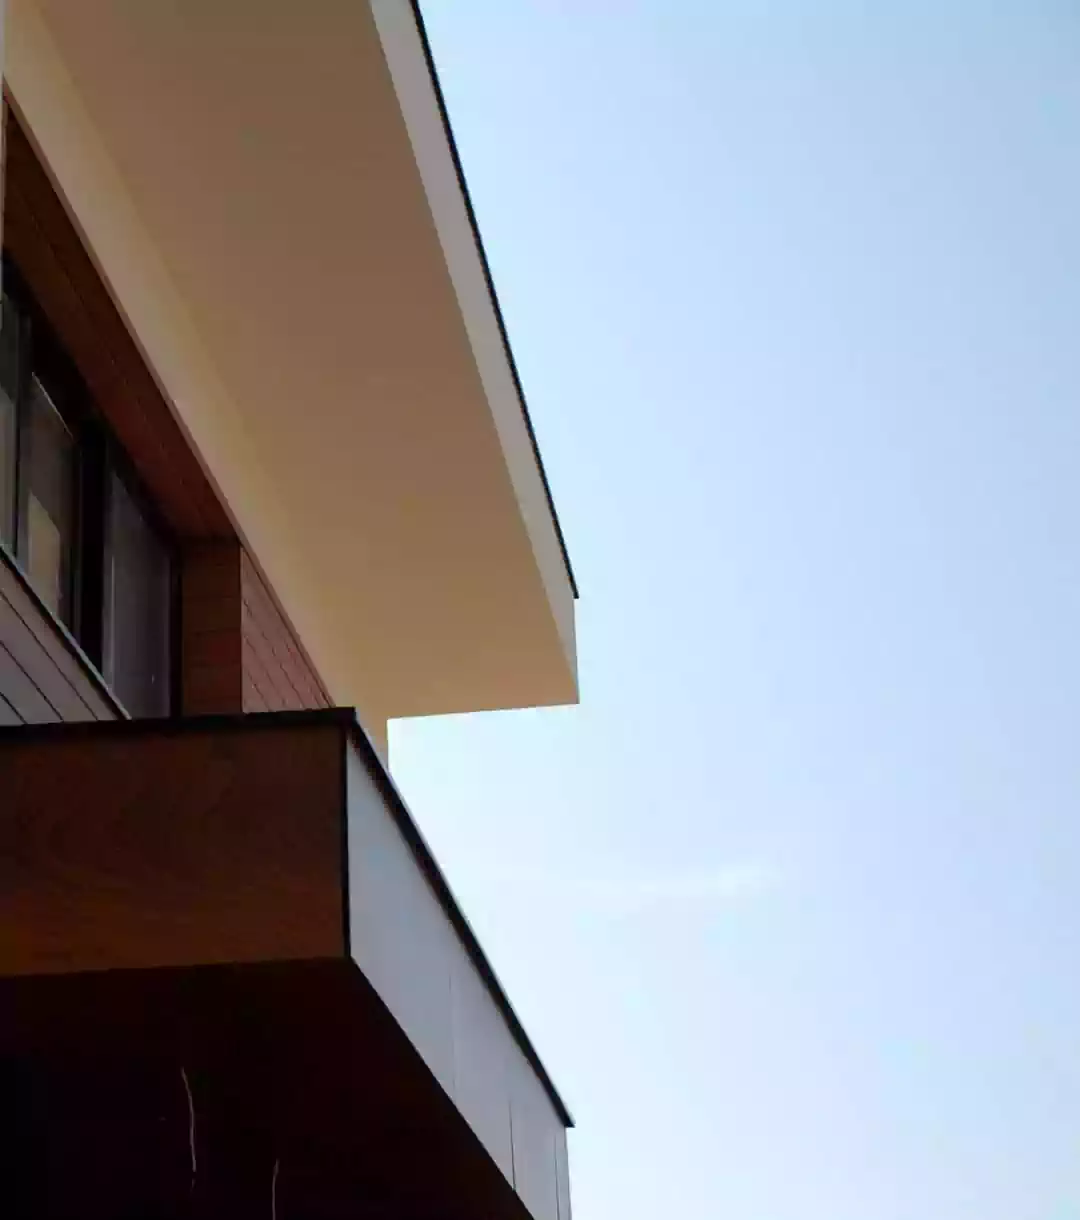 Balcony overhang detail on modern house in Avala Serbia. Design by architect Zimbabwe